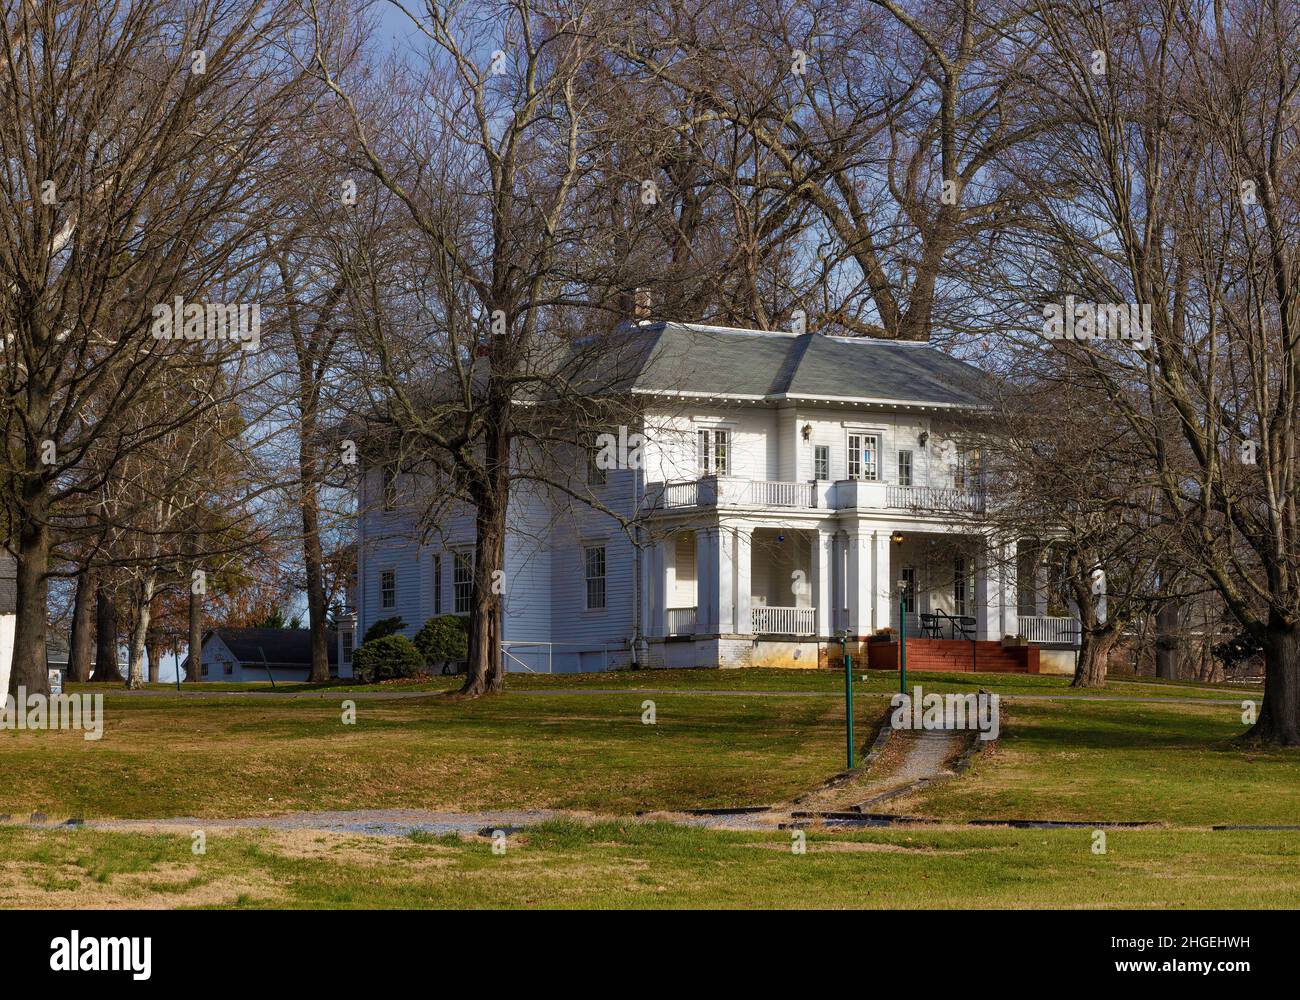 Johnson City, Tennessee, USA - December 24, 2021:  One of the houses on the property of Veterans Affair. Stock Photo